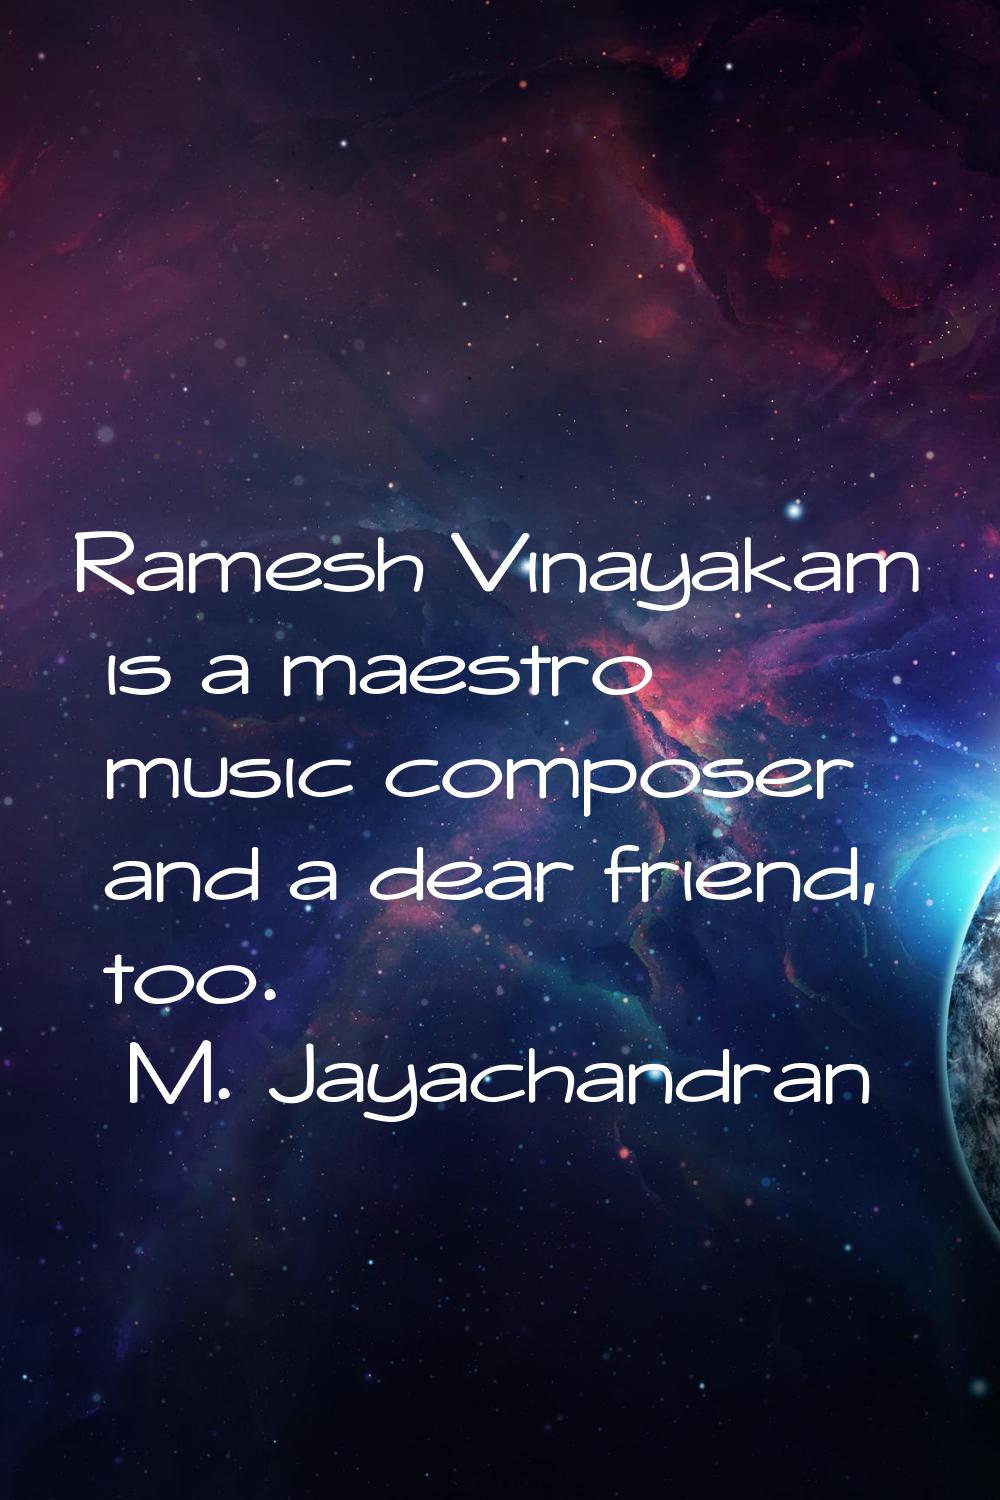 Ramesh Vinayakam is a maestro music composer and a dear friend, too.